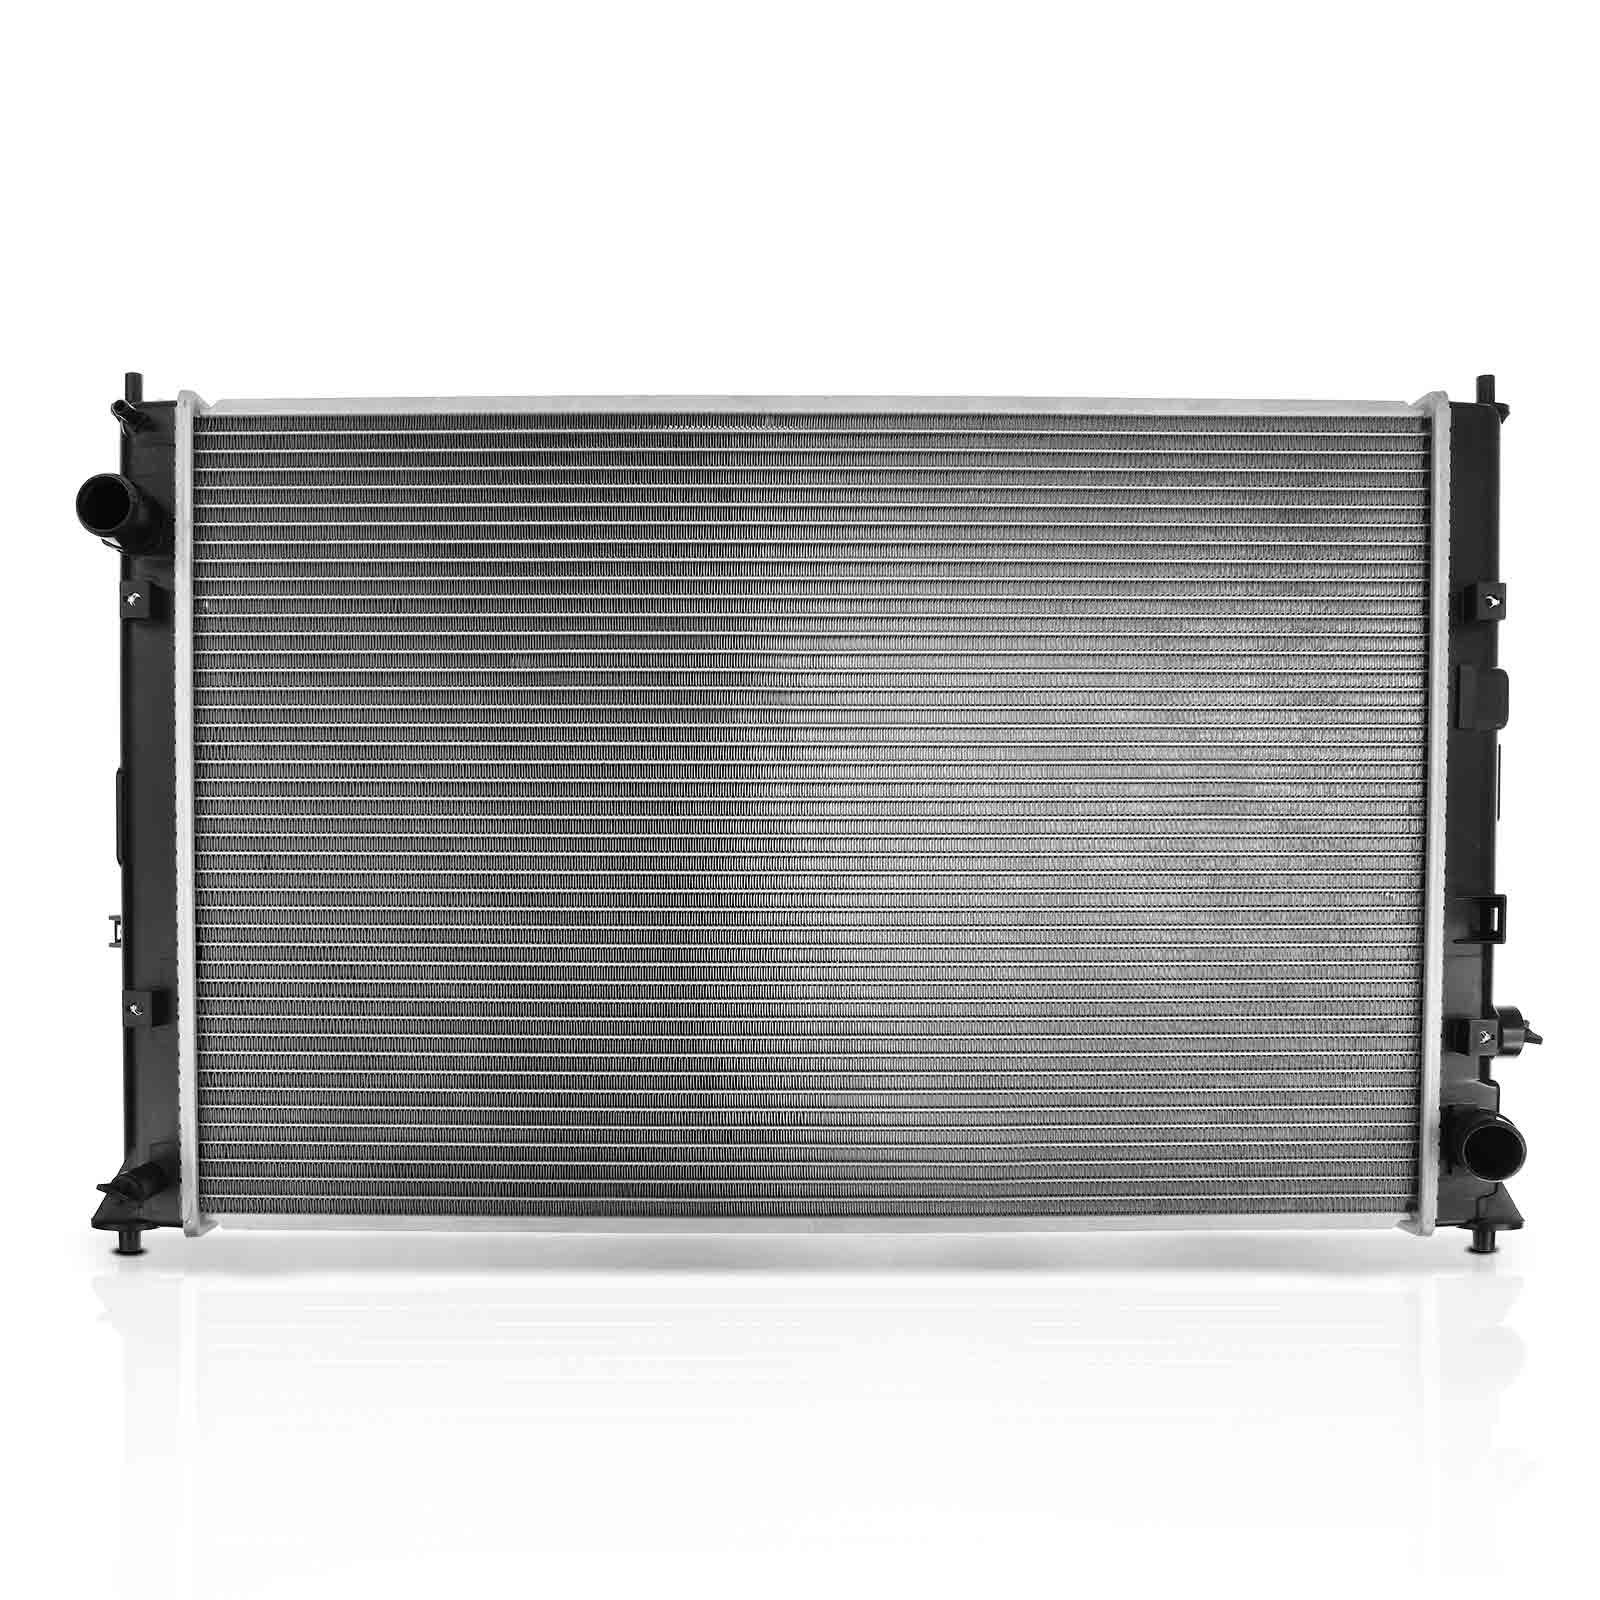 Aluminum Radiator without Oil Cooler for Honda Civic 2016-2020 L4 1.5L